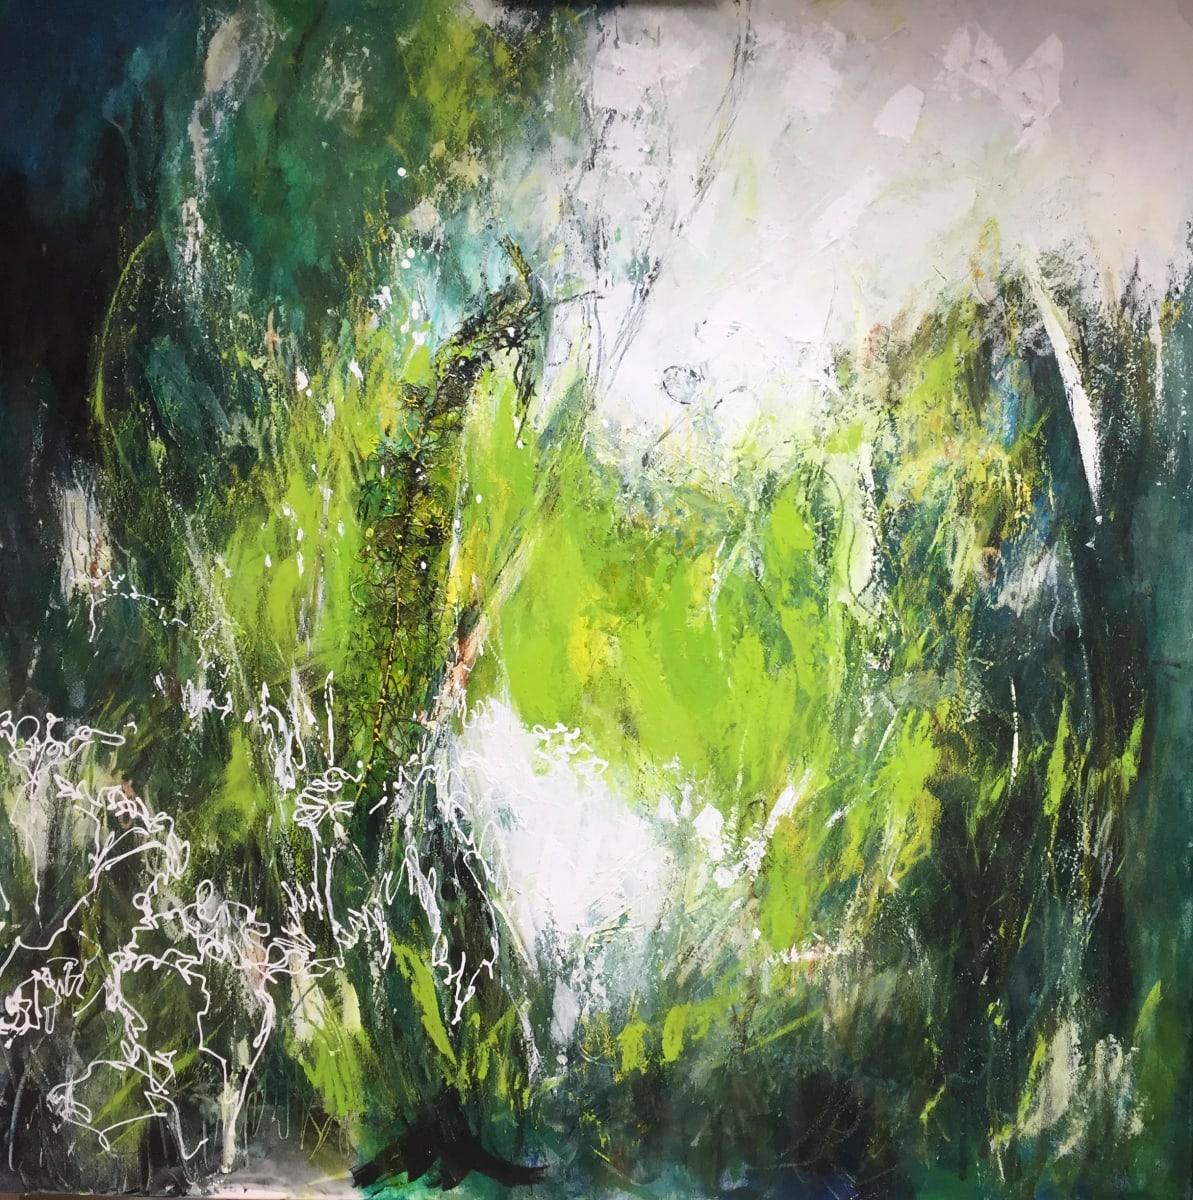 Spring Grasses by Karen Blacklock  Image: finished painting on canvas